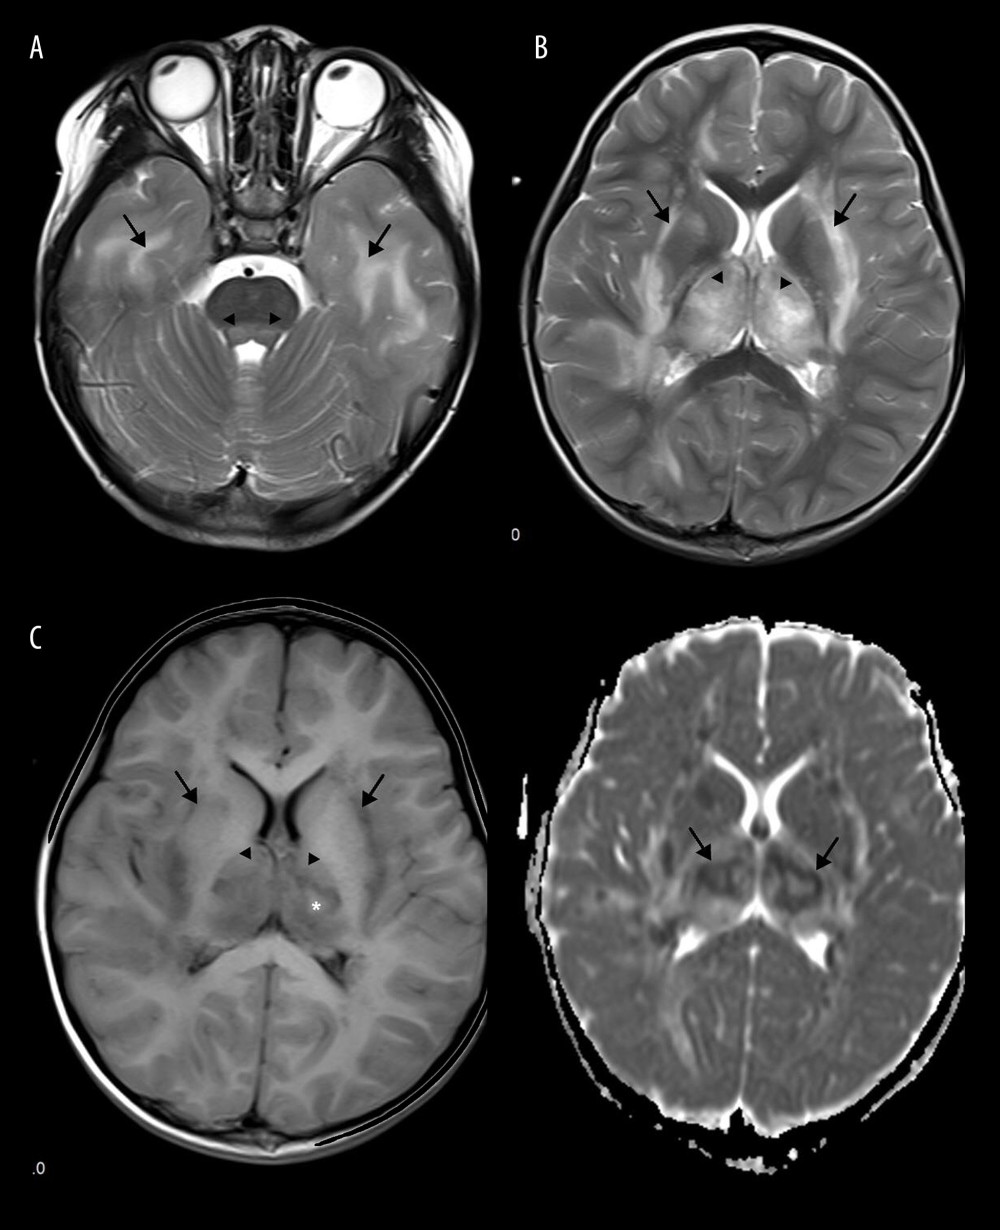 Emesia, febris for 5 days, followed by coma, with throat wrap for influenza type B positive (A–C). (A) Axial T2WI MRI showed mildly higher focal signal intensity in the dorsal aspect of pons (arrow), and mildly higher patchy signal intensity in white matter at bilateral temporal lobe (arrow). (B) Axal T2WI MRI indicated symmetric swelling and higher signal intensity in bilateral thalami (arrow), and white matter in external capsule was involved. (C) Axial T1WI MRI indicated mildly lower signal intensity in bilateral thalami (arrow) with slightly higher signal intensity in center (*), involvement of white matter in external capsule (*) was visible; axial ADC map showed more detailed 3-layer structure of bilateral thalami in ANE (arrow).